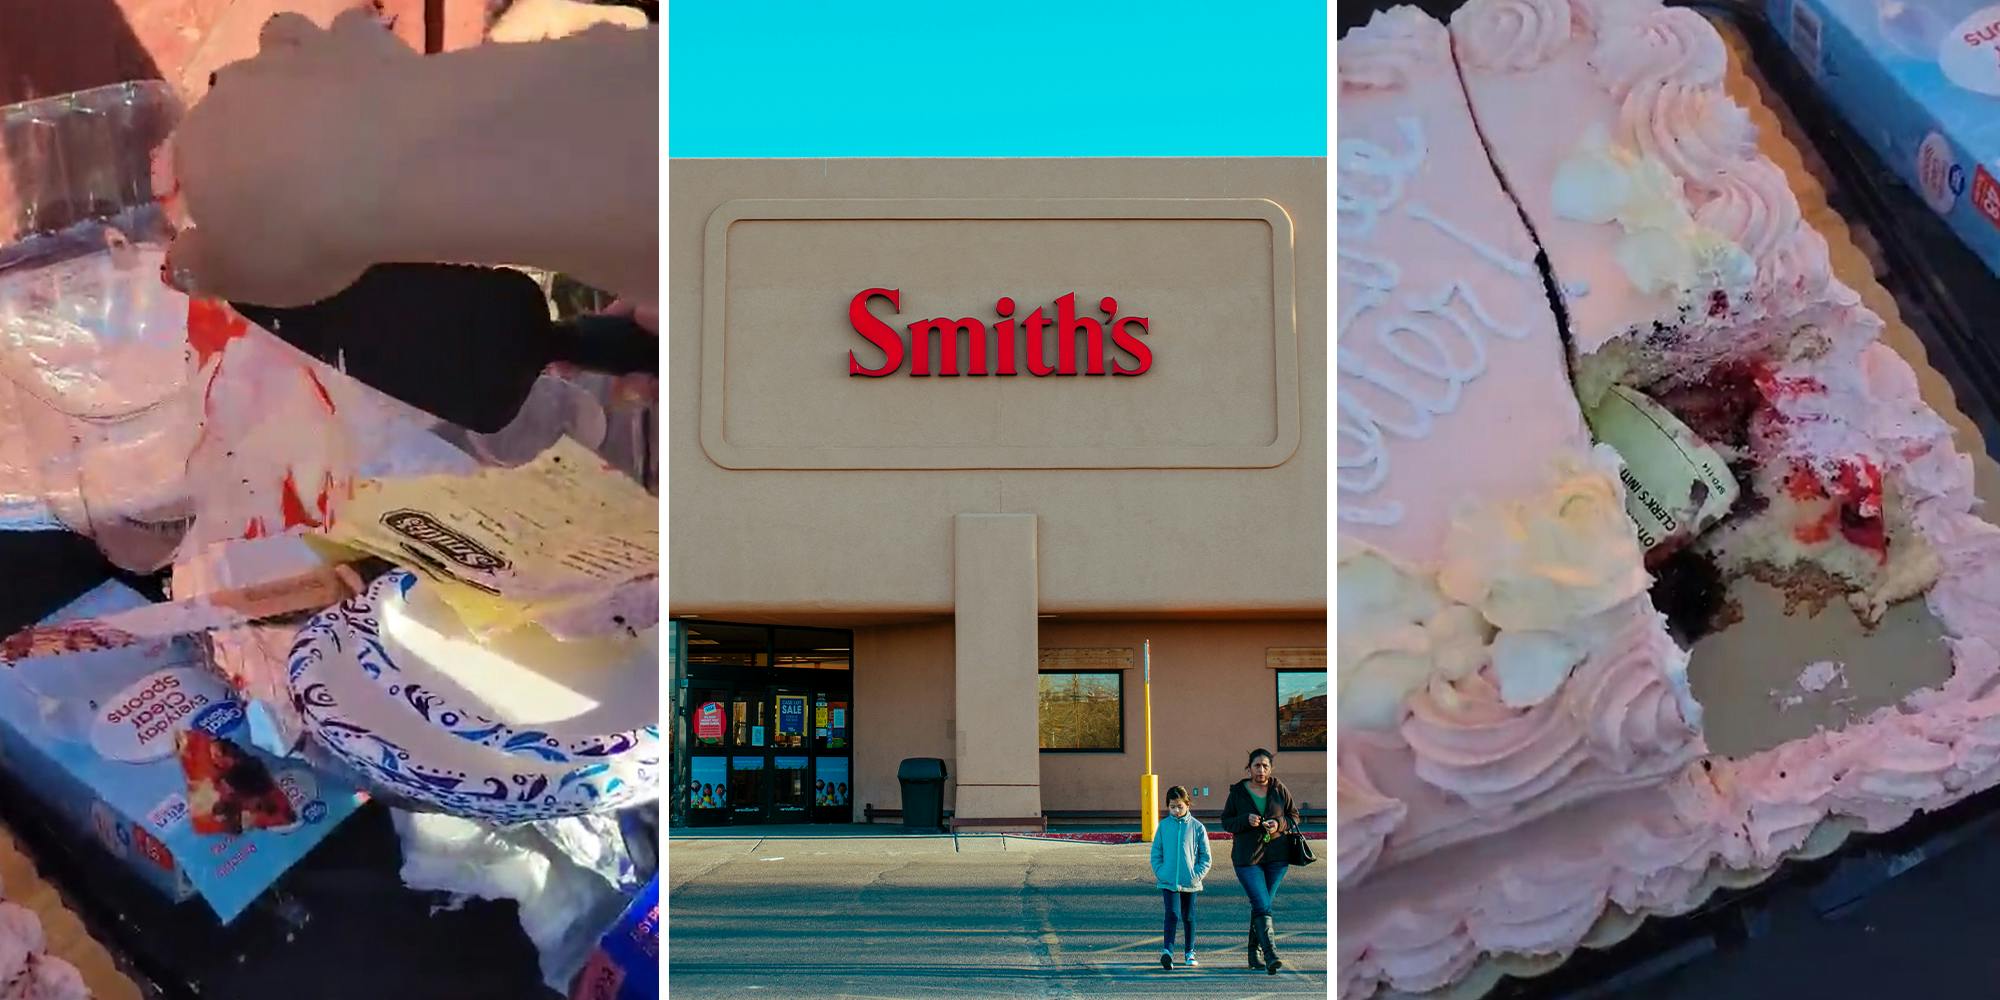 ‘You got the golden ticket!’: Smith’s customer discovers something shocking hidden in graduation cake